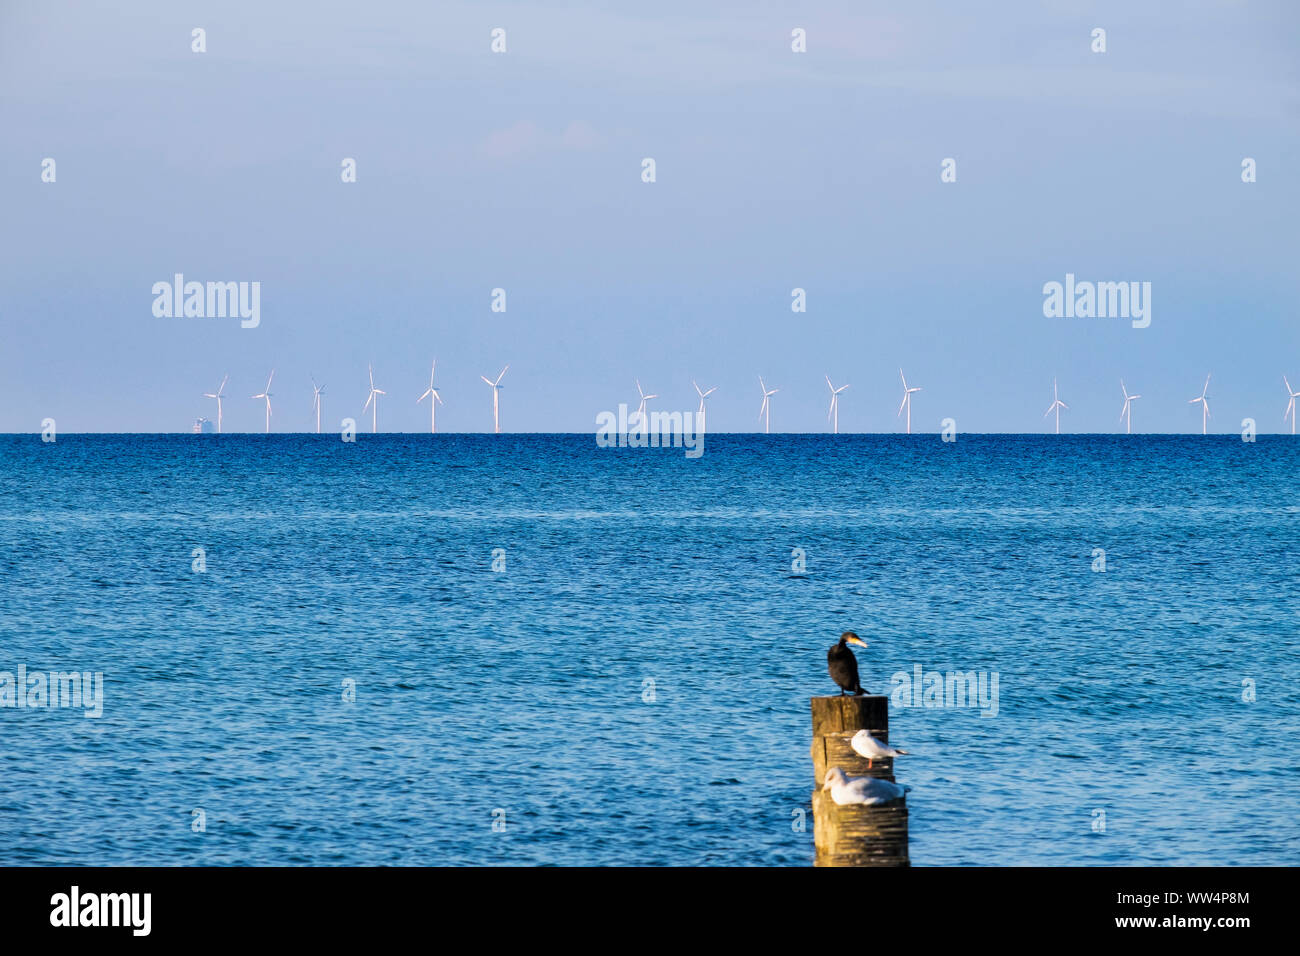 Offshore wind power stations in the Baltic Sea, seen from Prerow, DarÃŸ, Fischland-DarÃŸ-Zingst, Mecklenburg-West Pomerania, Germany Stock Photo